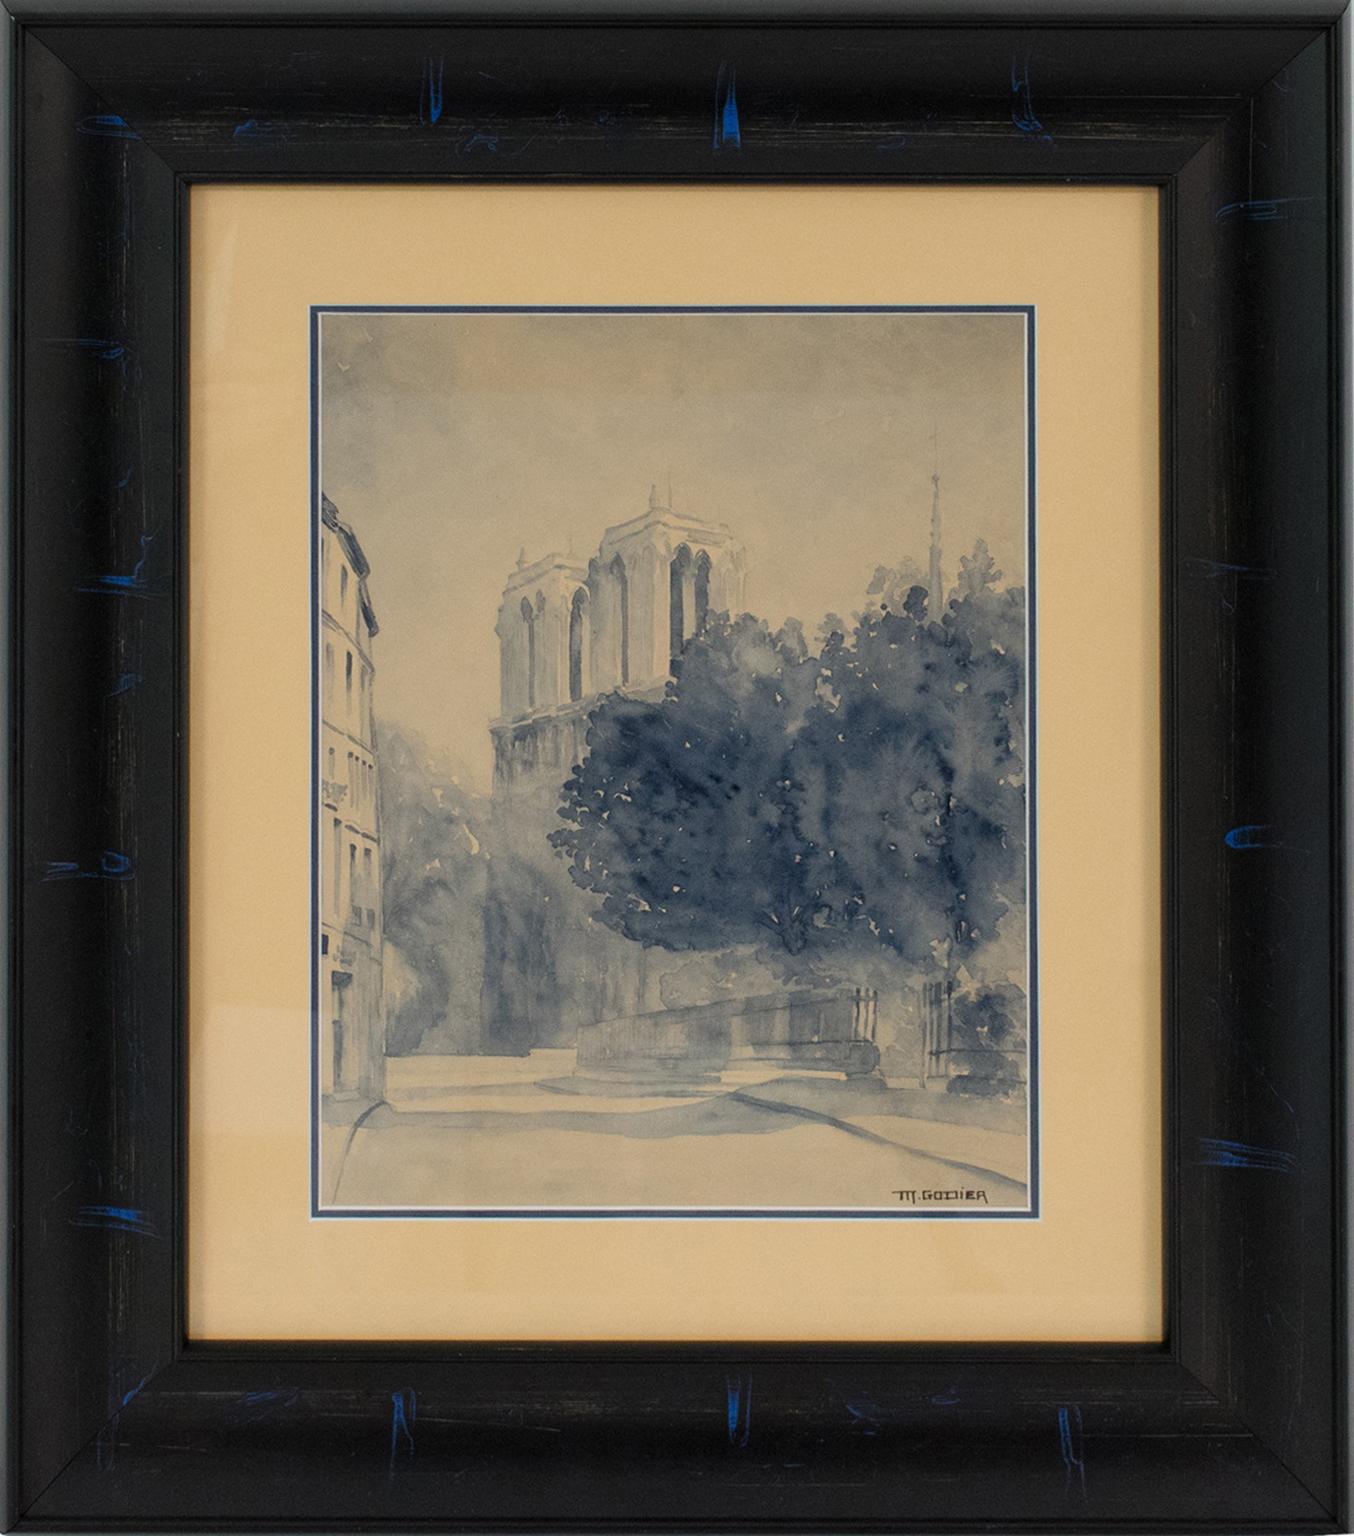 This lovely blue watercolor painting is by M. Godier, France (20th Century). The artwork is signed in the bottom right corner. The composition features an unusual representation of the Notre Dame de Paris Cathedral view from a nearby street traced